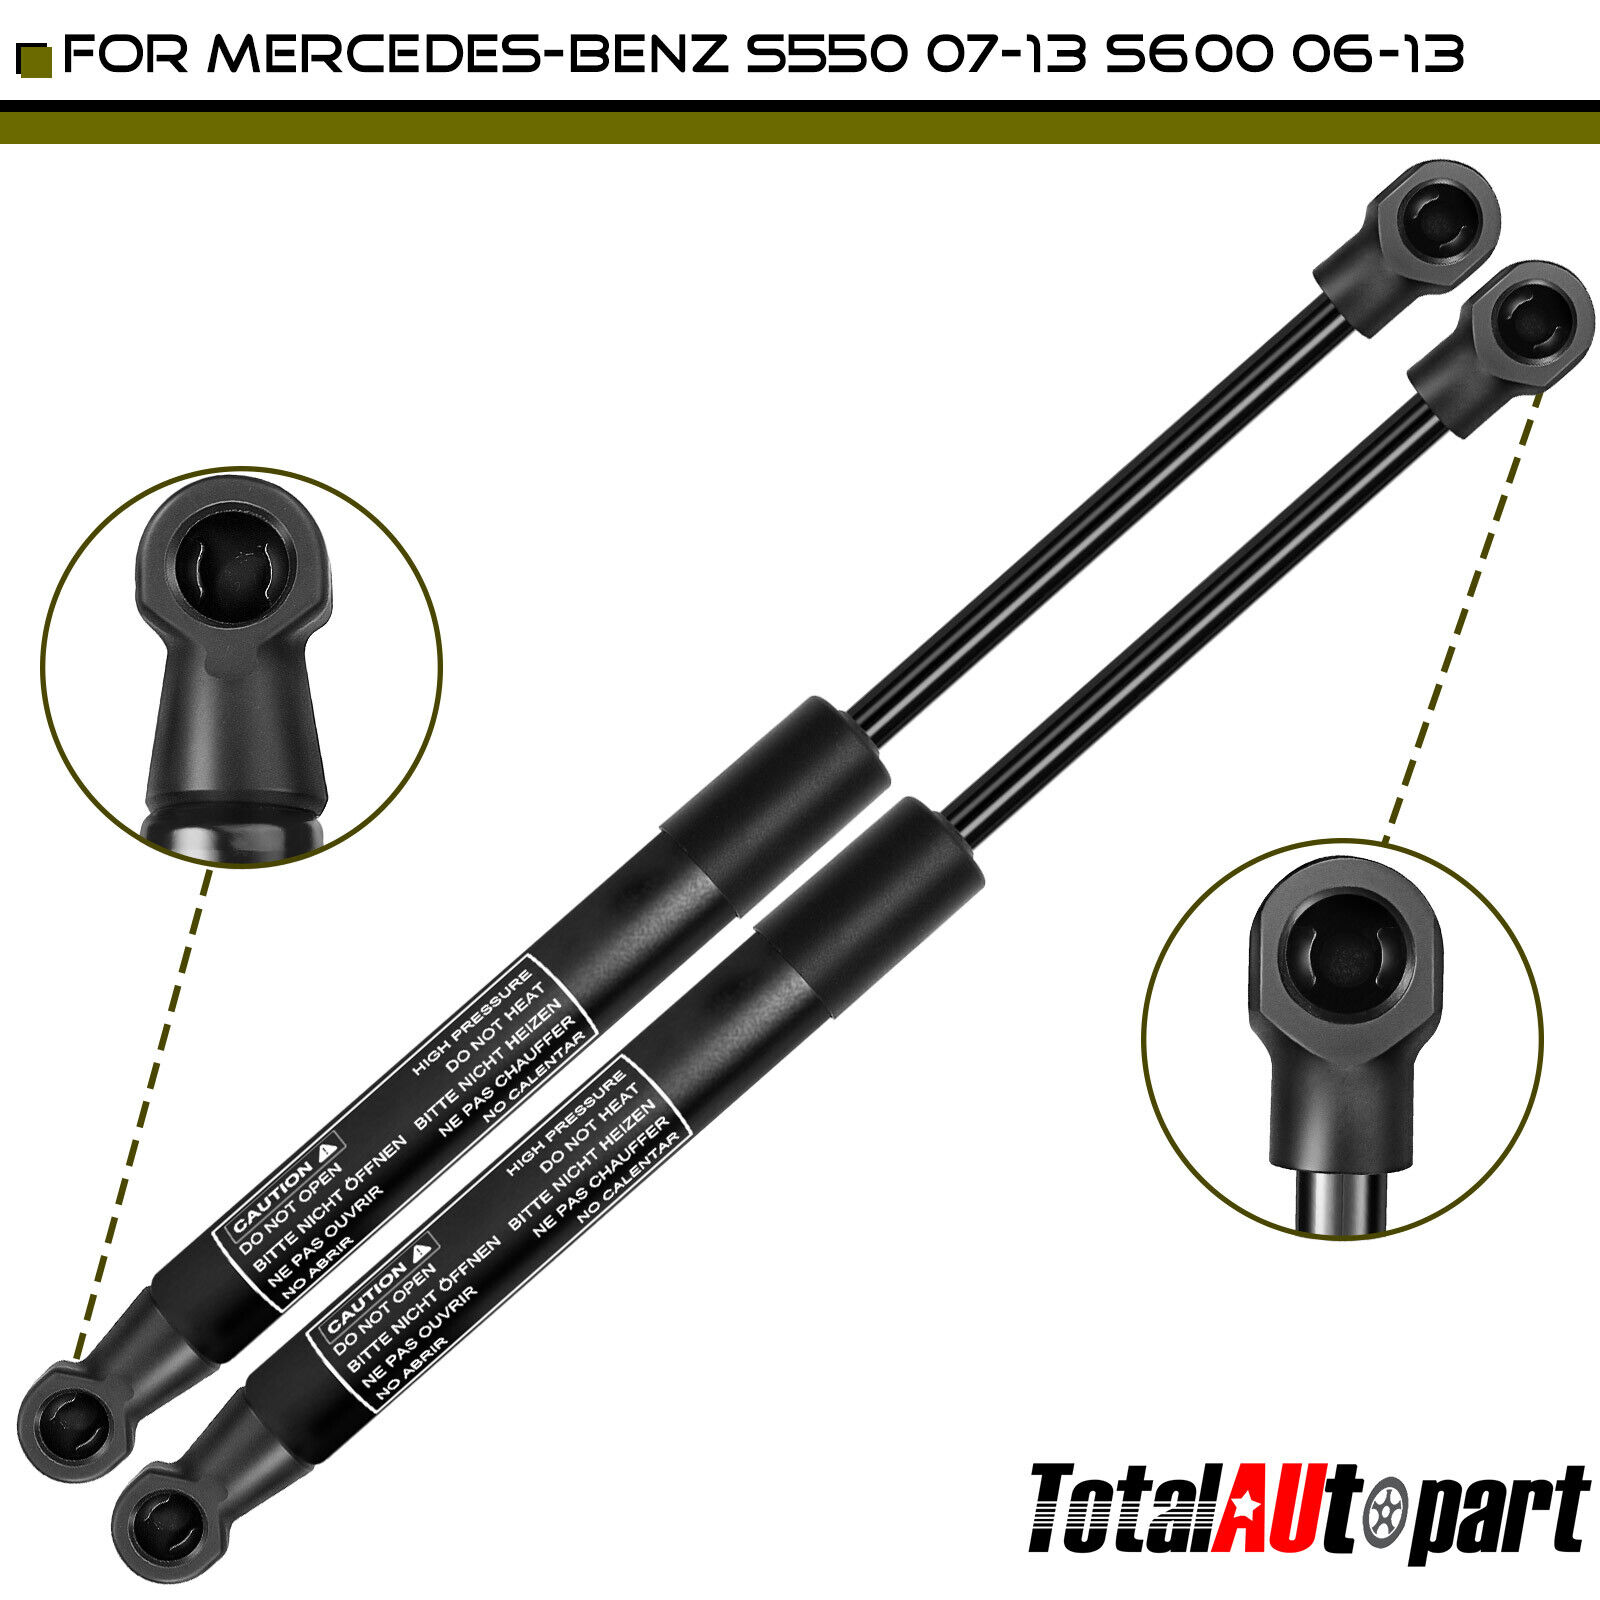 Lift Support Shock for Mercedes-Benz S550 07-13 S600 S65 AMG 06-13 Rear Trunk